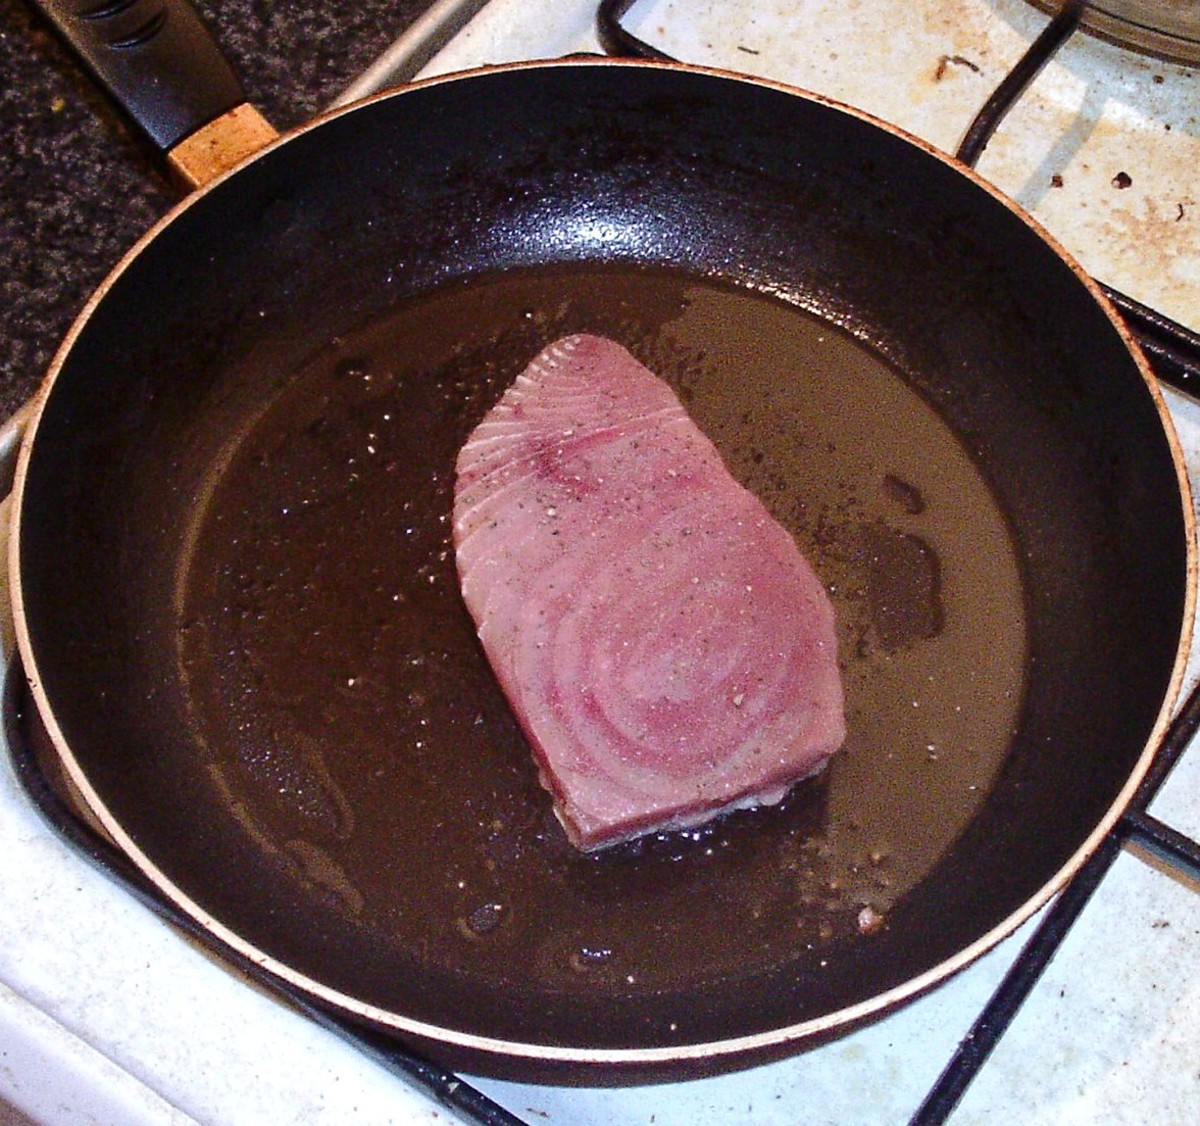 Tuna fillet is added to searingly hot frying pan